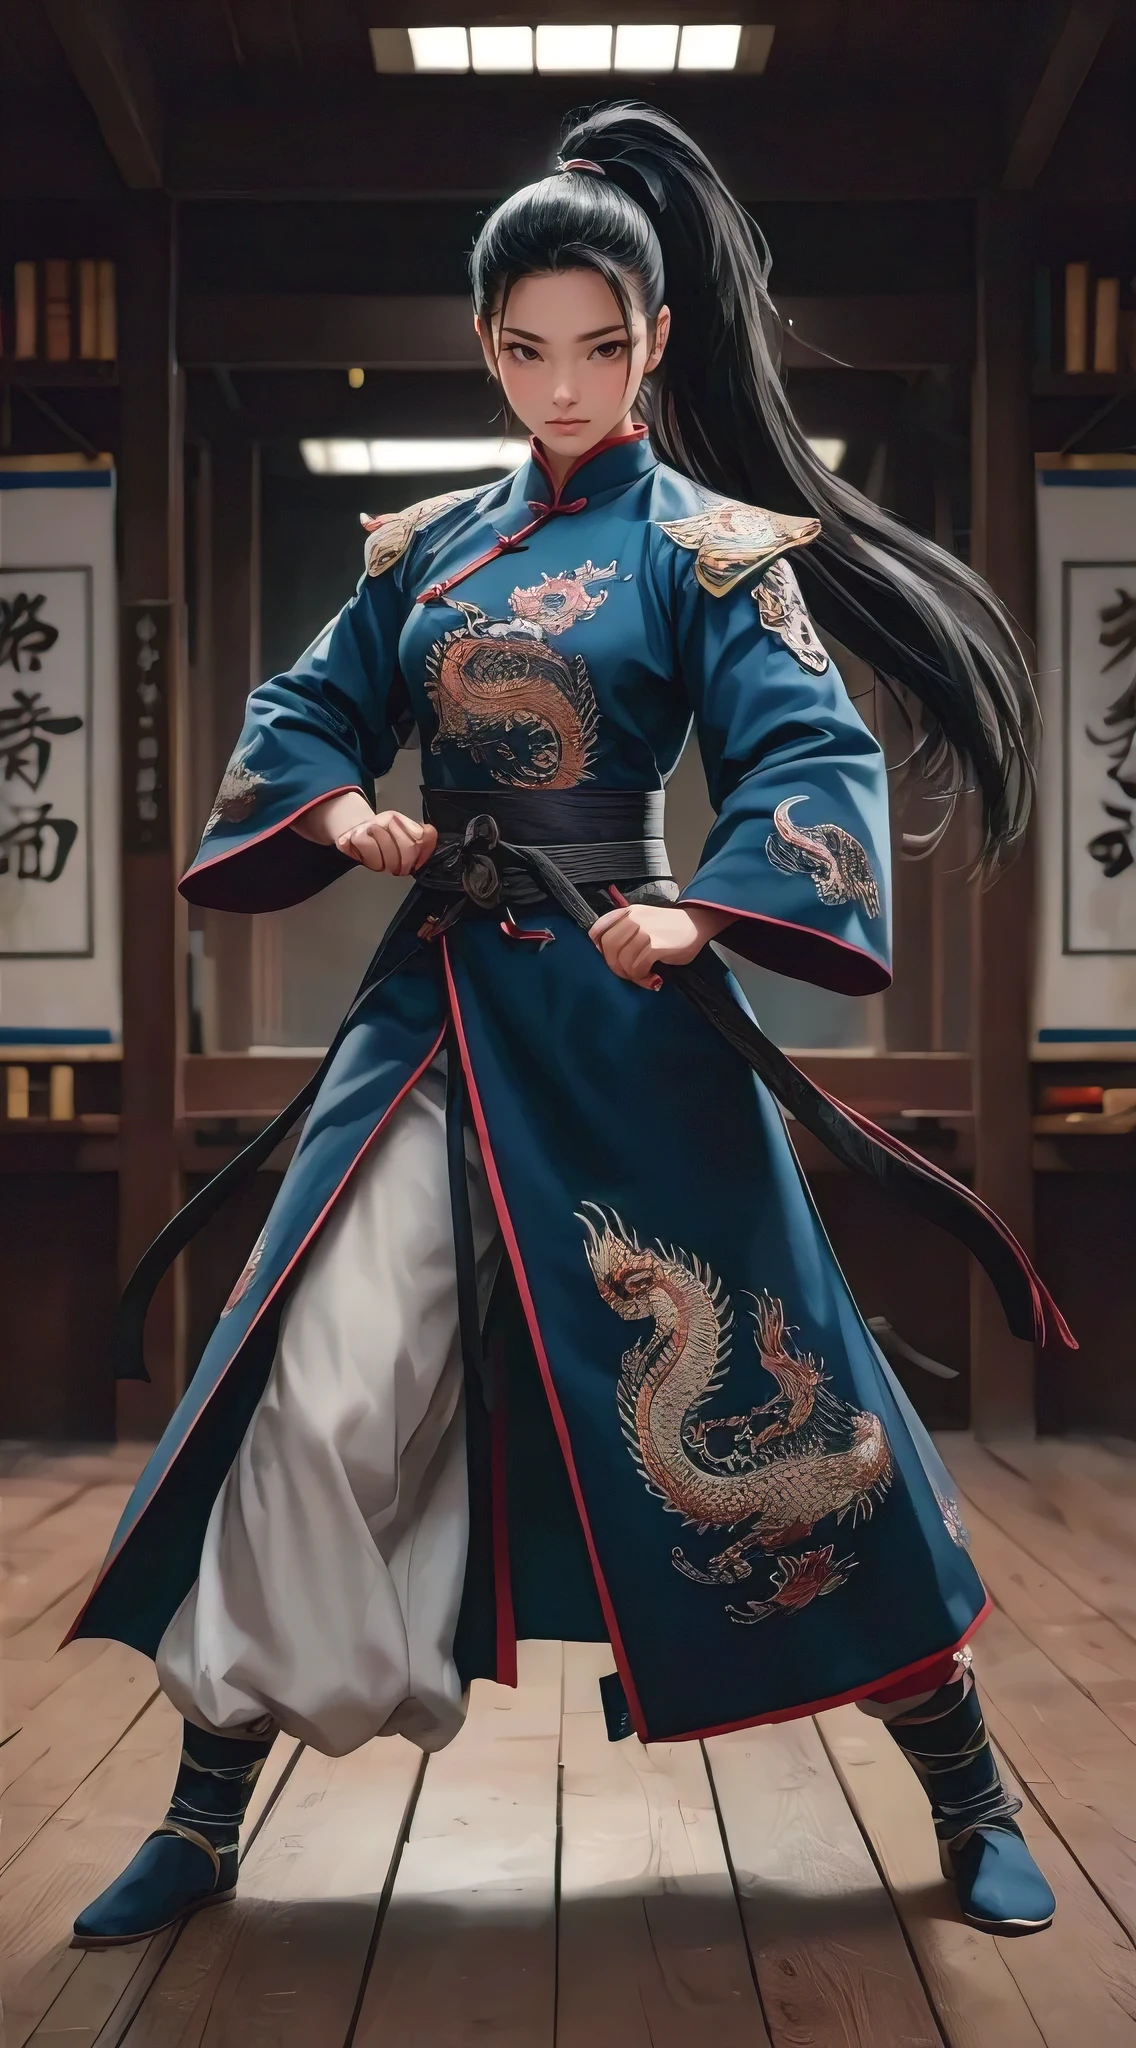 A striking photorealistic anime illustration of a female martial artist wearing a traditional Chinese qipao adorned with intricate dragon motifs. Her long, black hair is tied back in a high ponytail, and her intense eyes convey a deep focus. She stands confidently in a dojo, the wooden floor beneath her feet echoing the strength and mastery of her craft. Scrolls and martial arts paraphernalia are visible on the walls, further emphasizing her training and dedication.